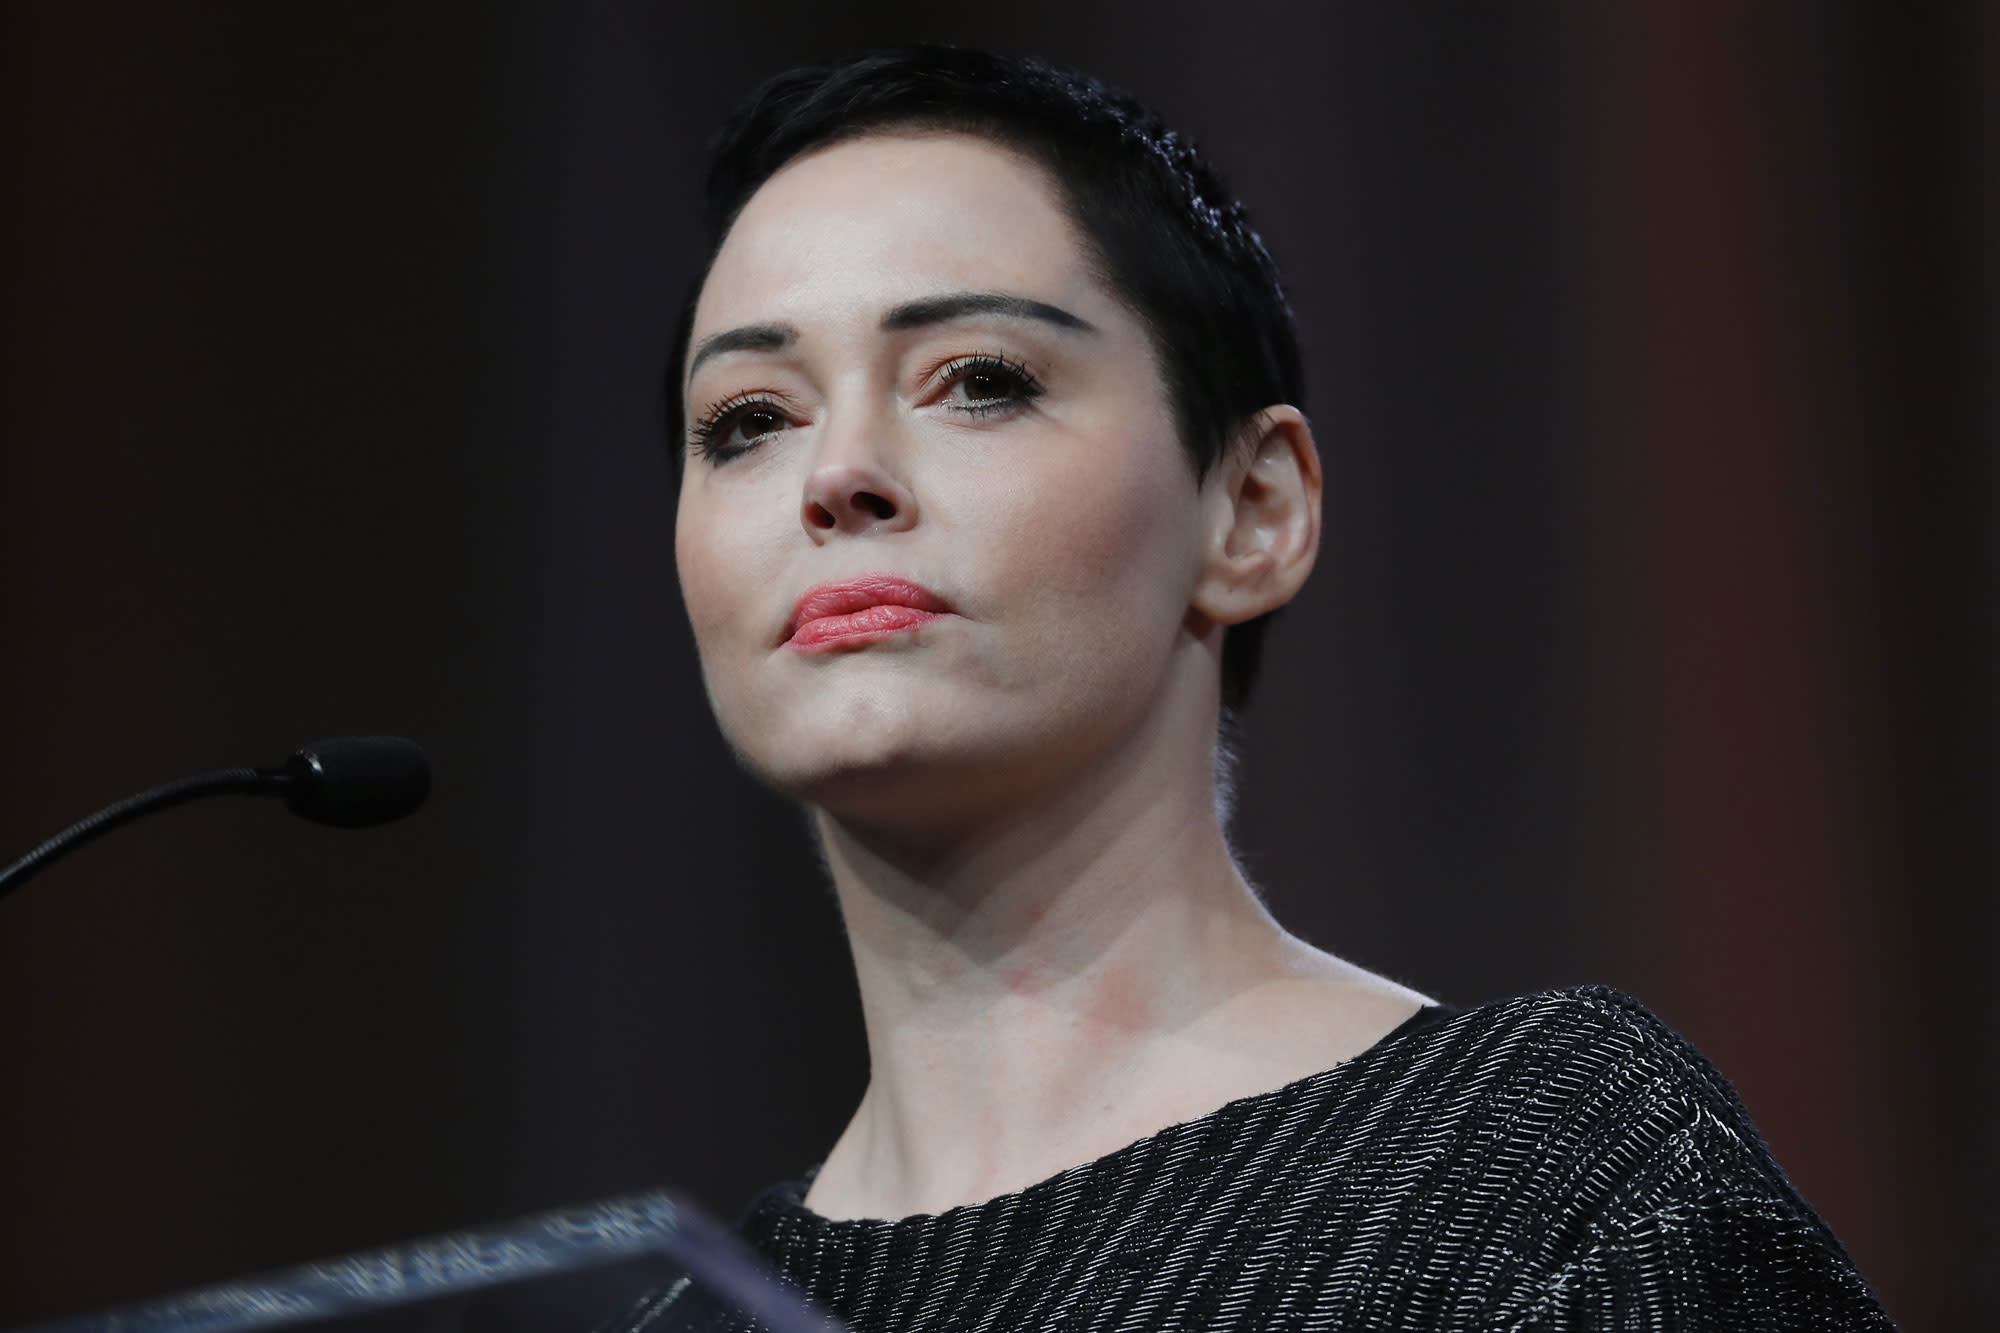 Arrest Warrant Issued For Rose Mcgowan In Connection To Drug Charge 